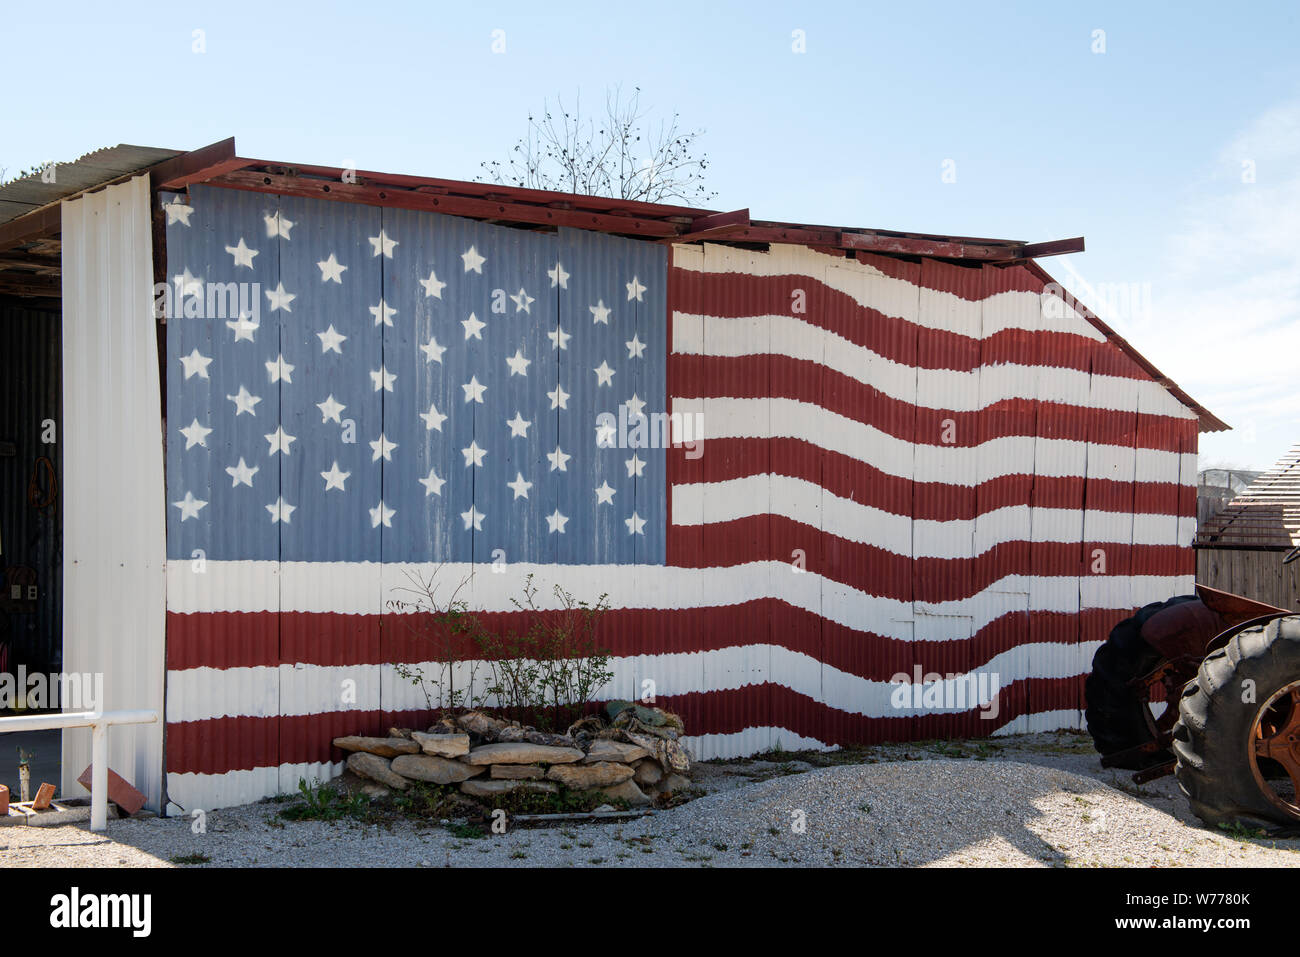 A colorful rendition of the American flag, painted on the side of a large utility shed in the town of Carbon in Eastland County, Texas Physical description: 1 photograph : digital, tiff file, color.  Notes: Gift; The Lyda Hill Foundation; 2014; (DLC/PP-2014:054).; Title, date and keywords based on information provided by the photographer.; Forms part of: Lyda Hill Texas Collection of Photographs in Carol M. Highsmith's America Project in the Carol M. Highsmith Archive.; Stock Photo